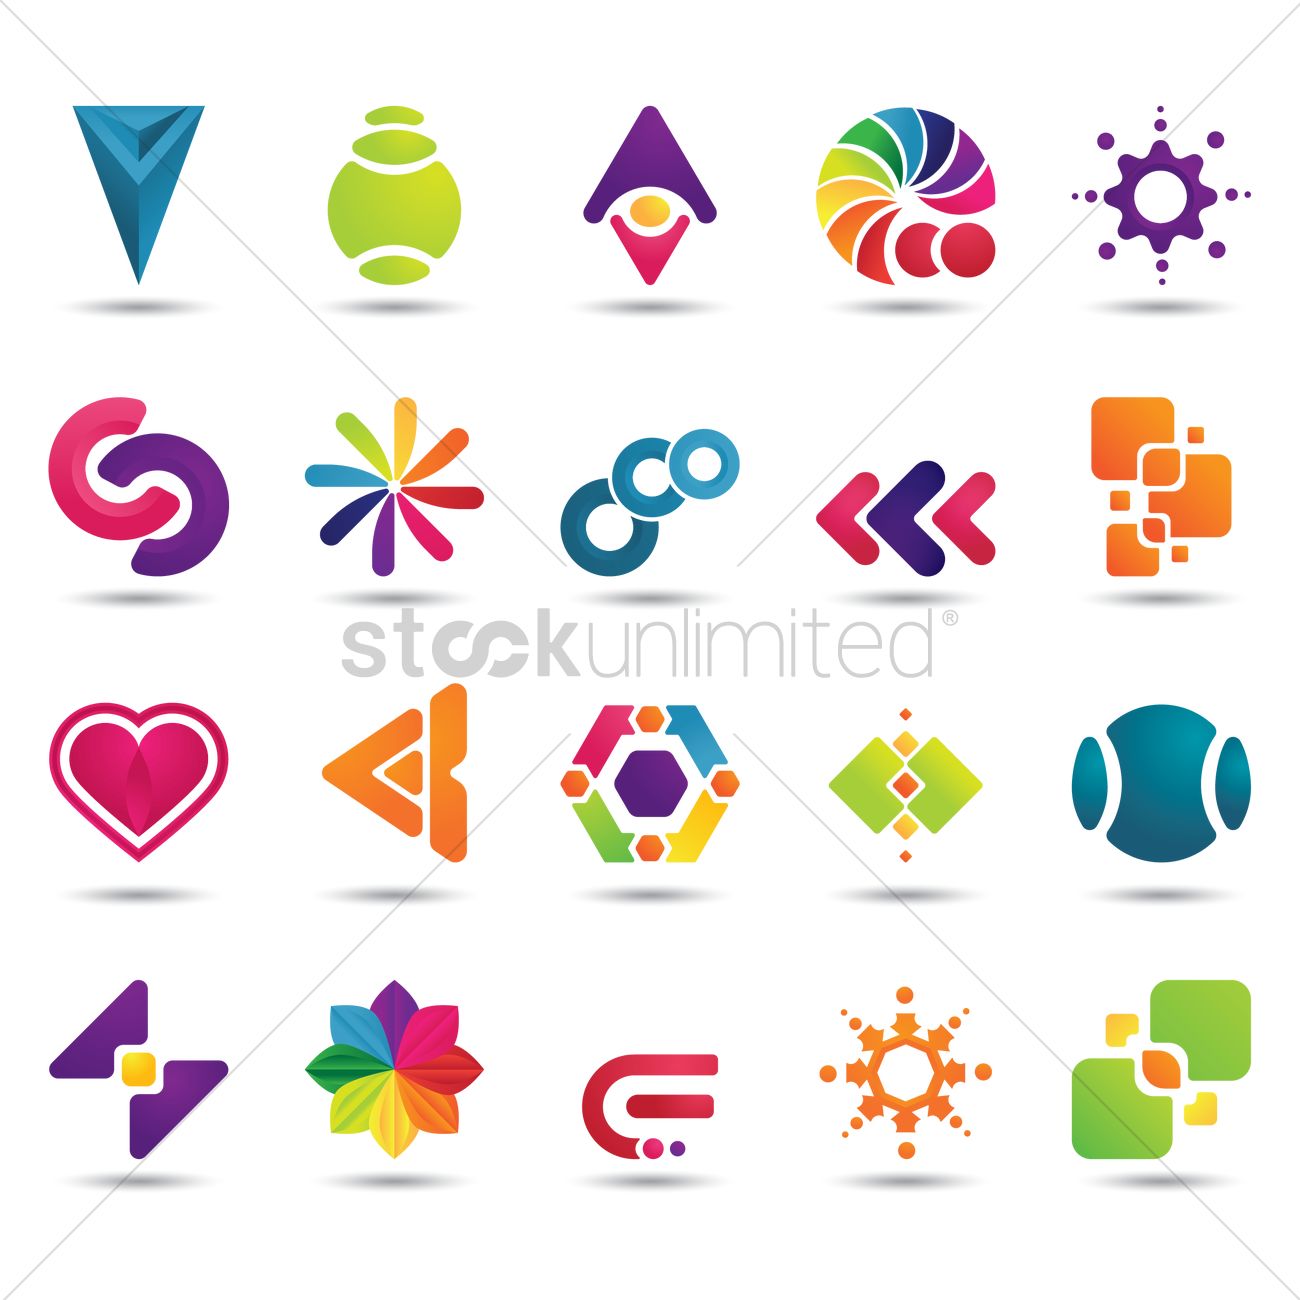 Download Logo Elements Vector at Vectorified.com | Collection of ...